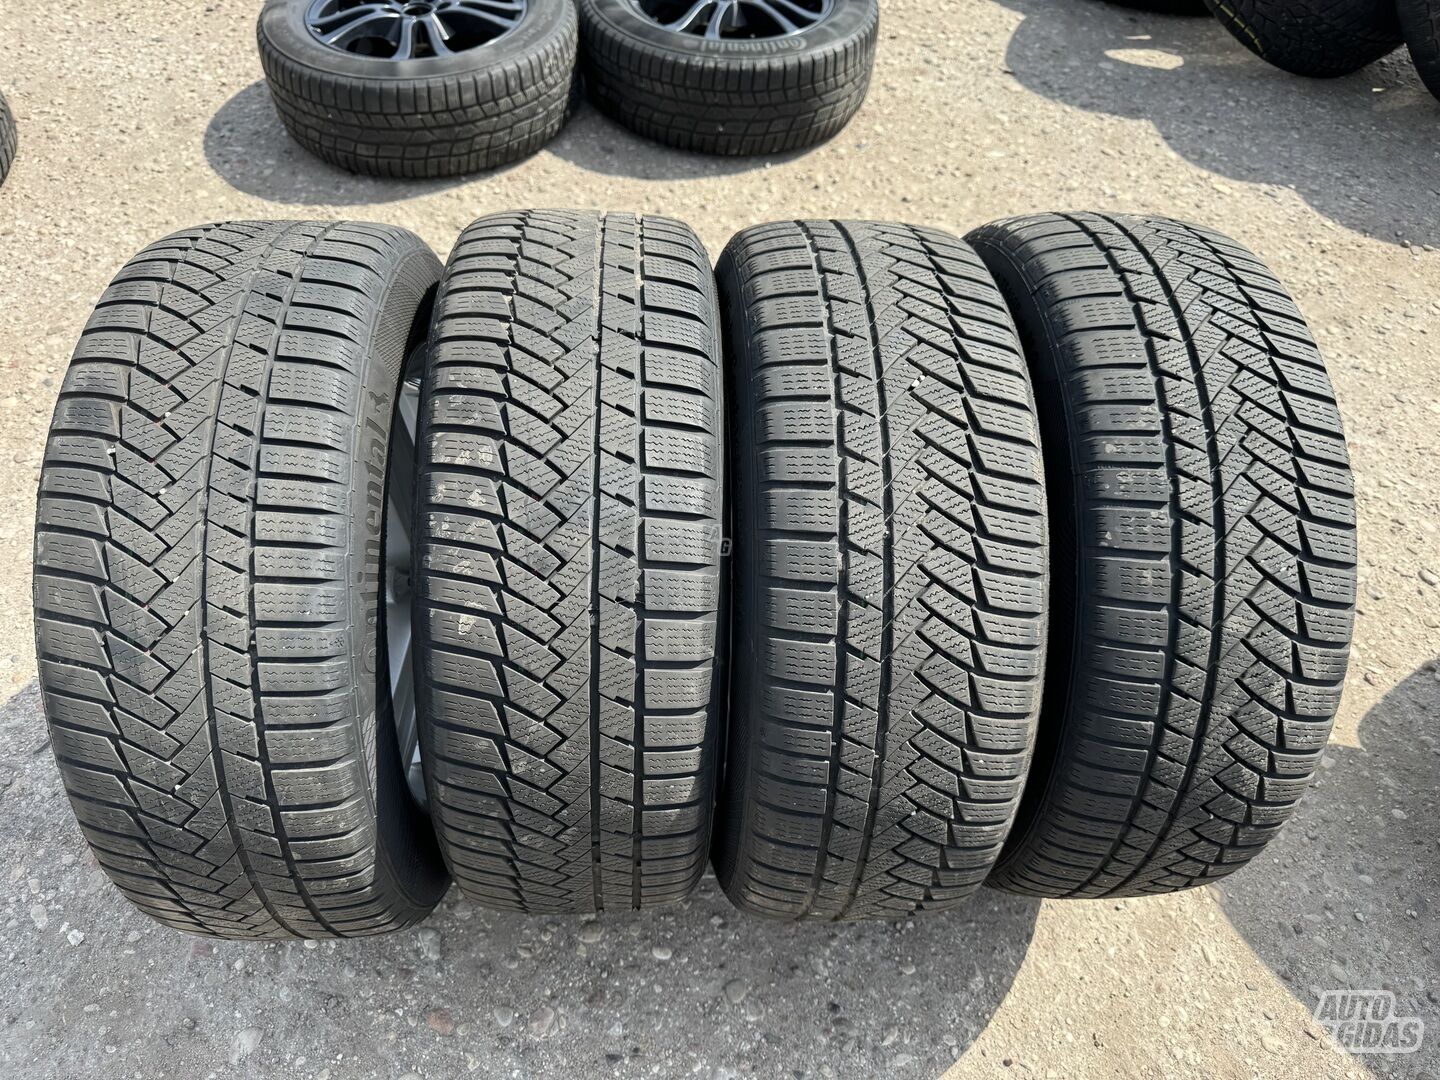 Continental Siunciam, 2019m 6-7m R17 universal tyres passanger car